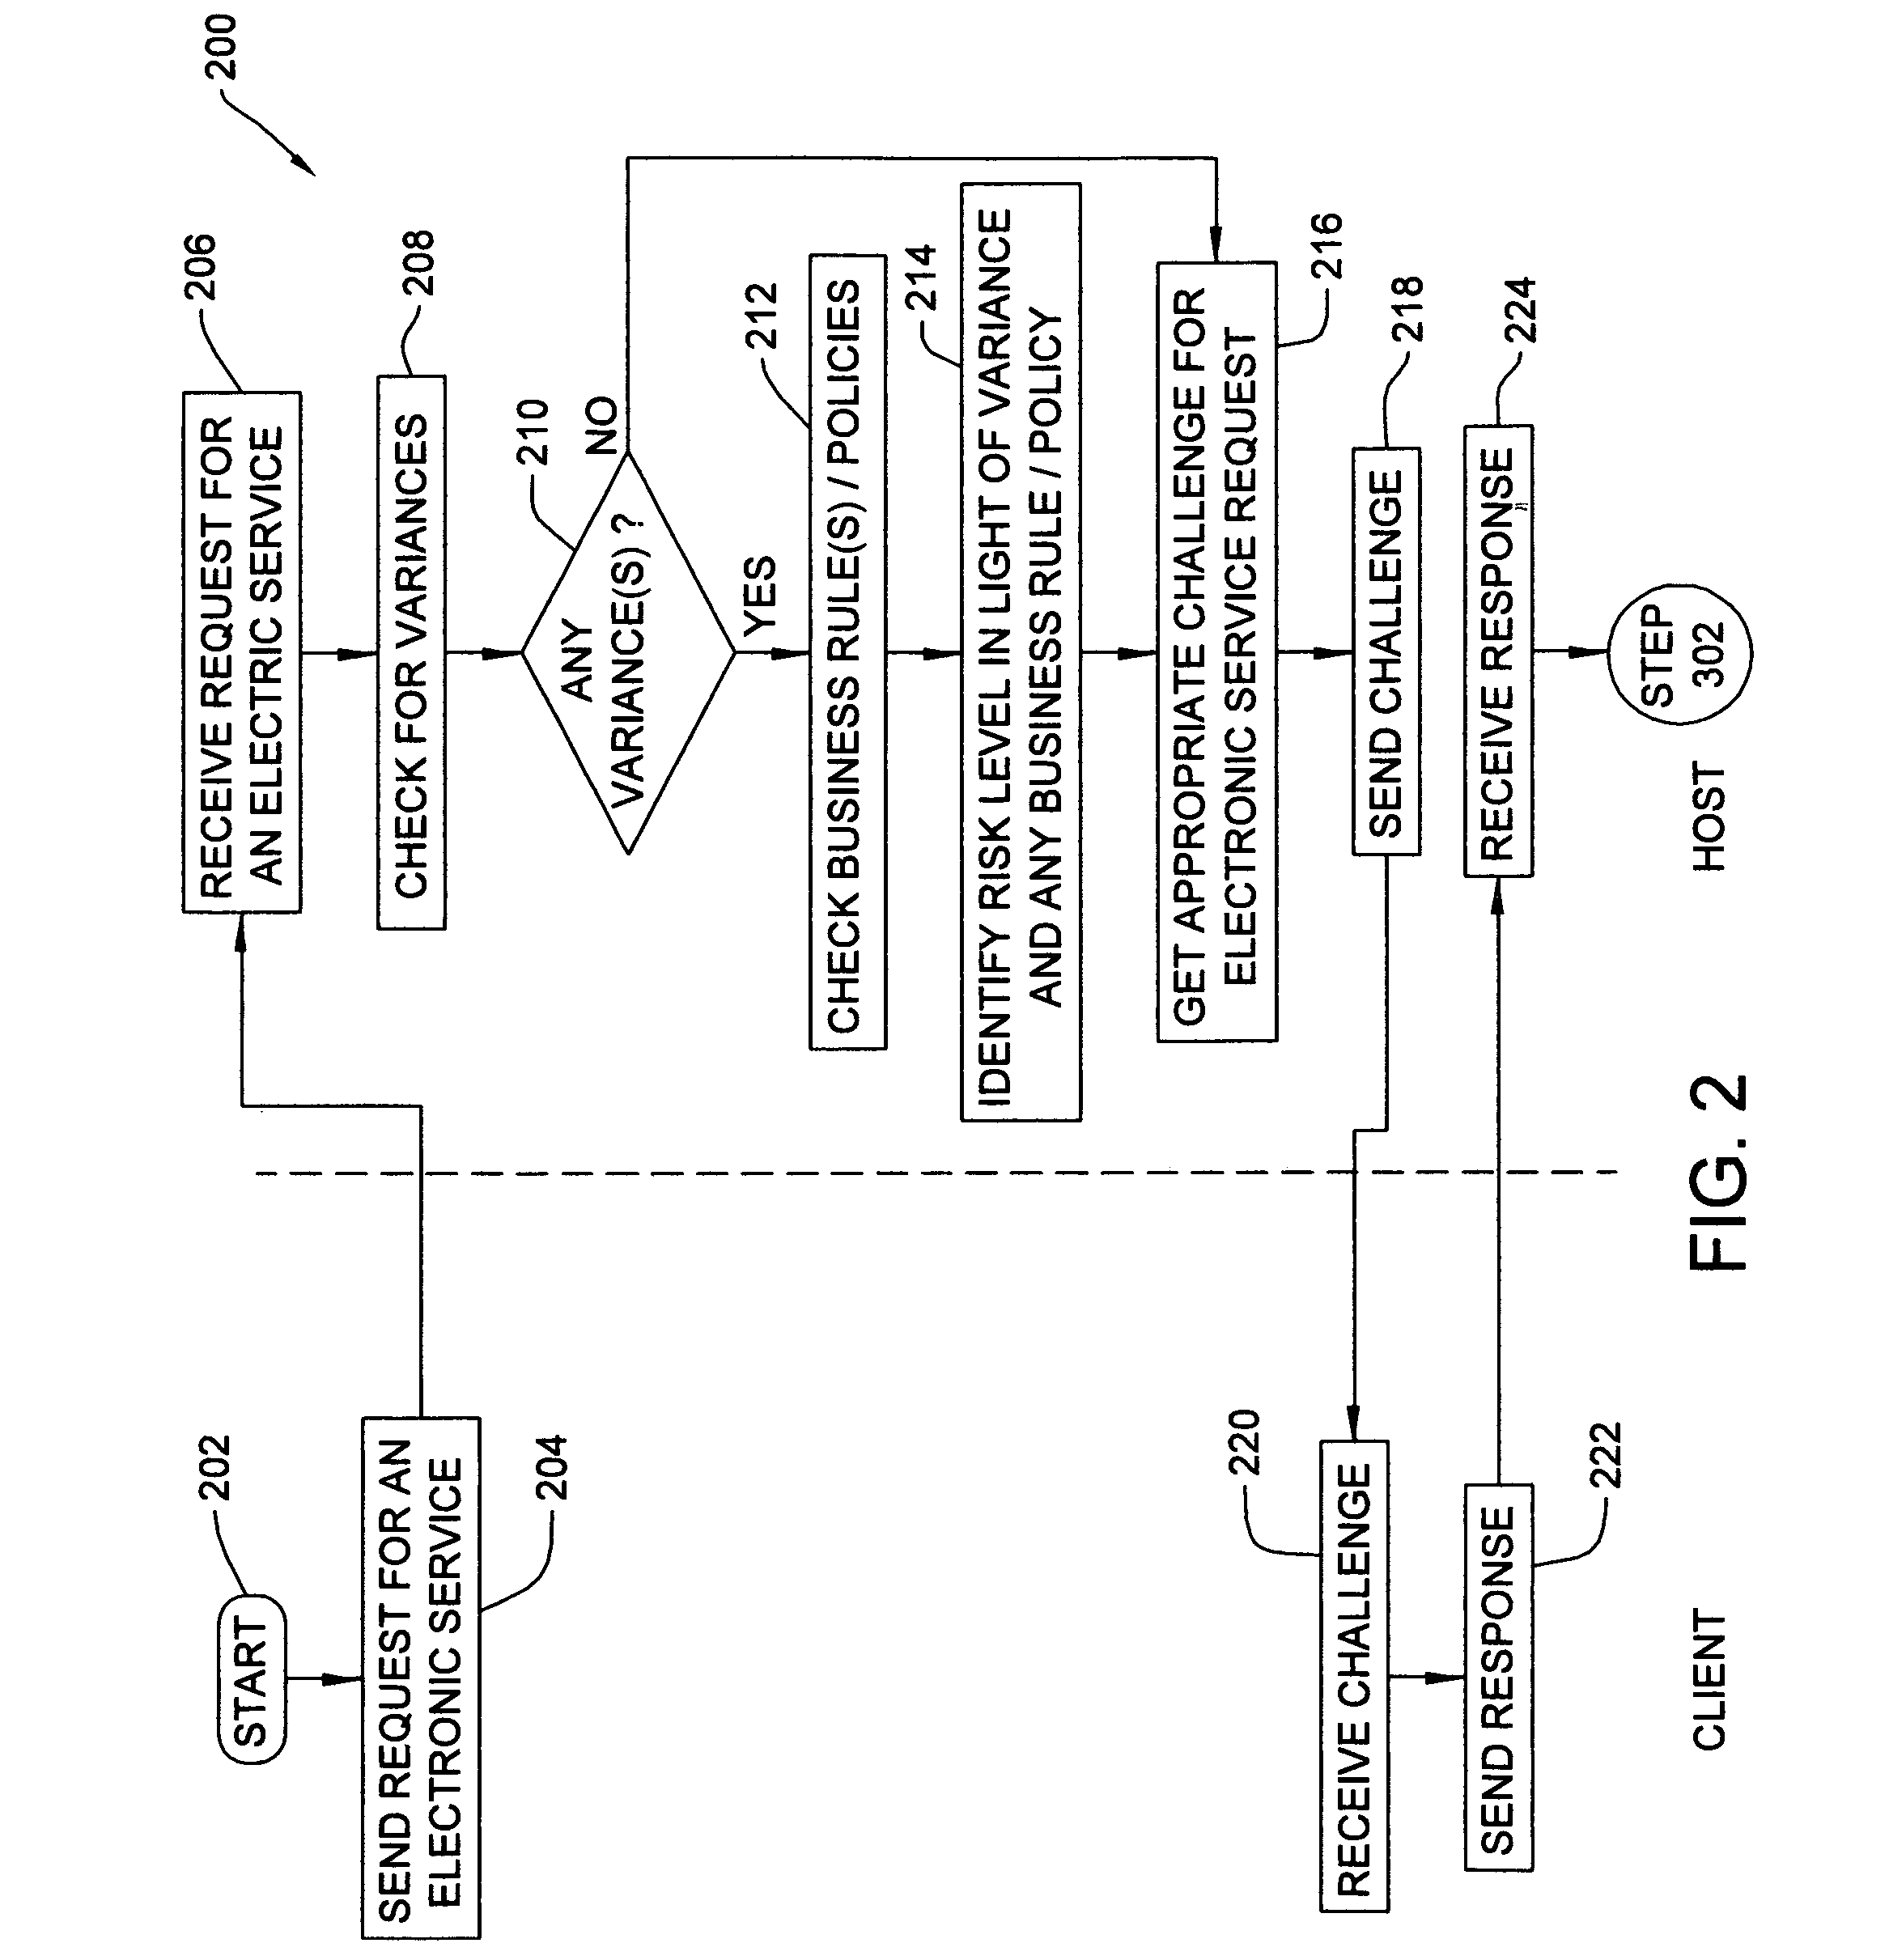 Method, system and program product for authenticating a user seeking to perform an electronic service request